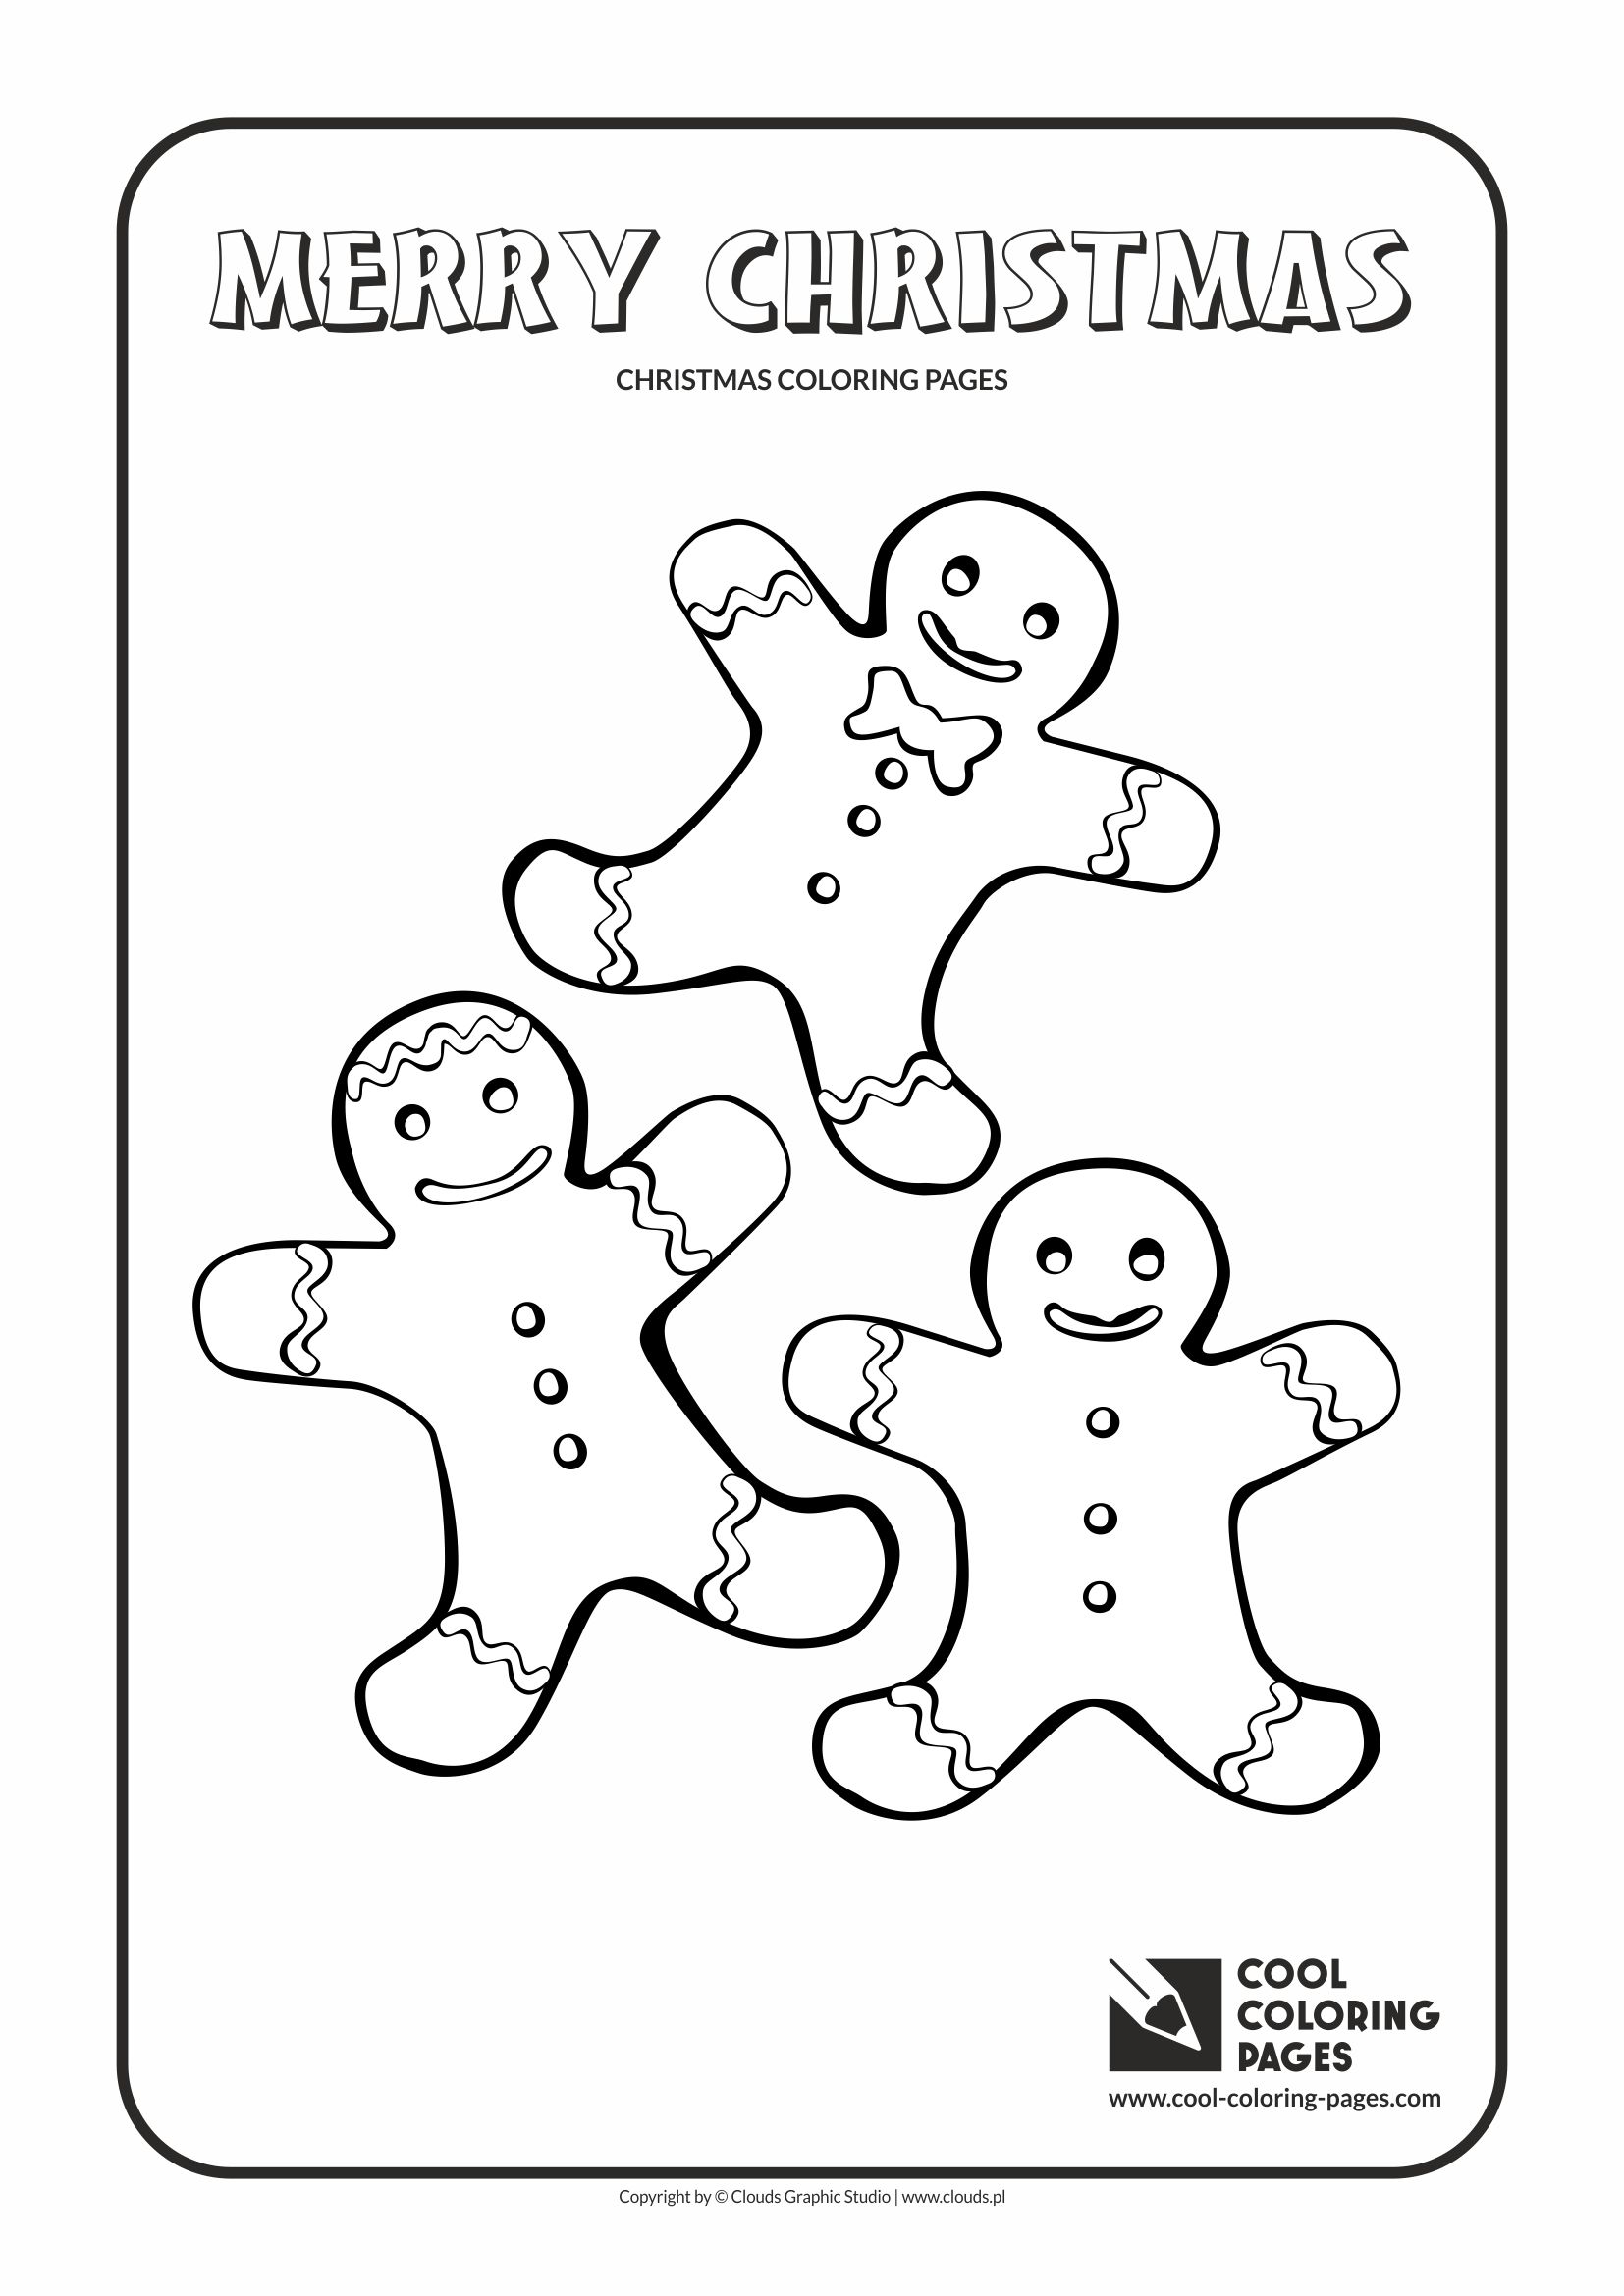 Cool Coloring Pages - Holidays / Gingerbread men / Coloring page with Gingerbread men